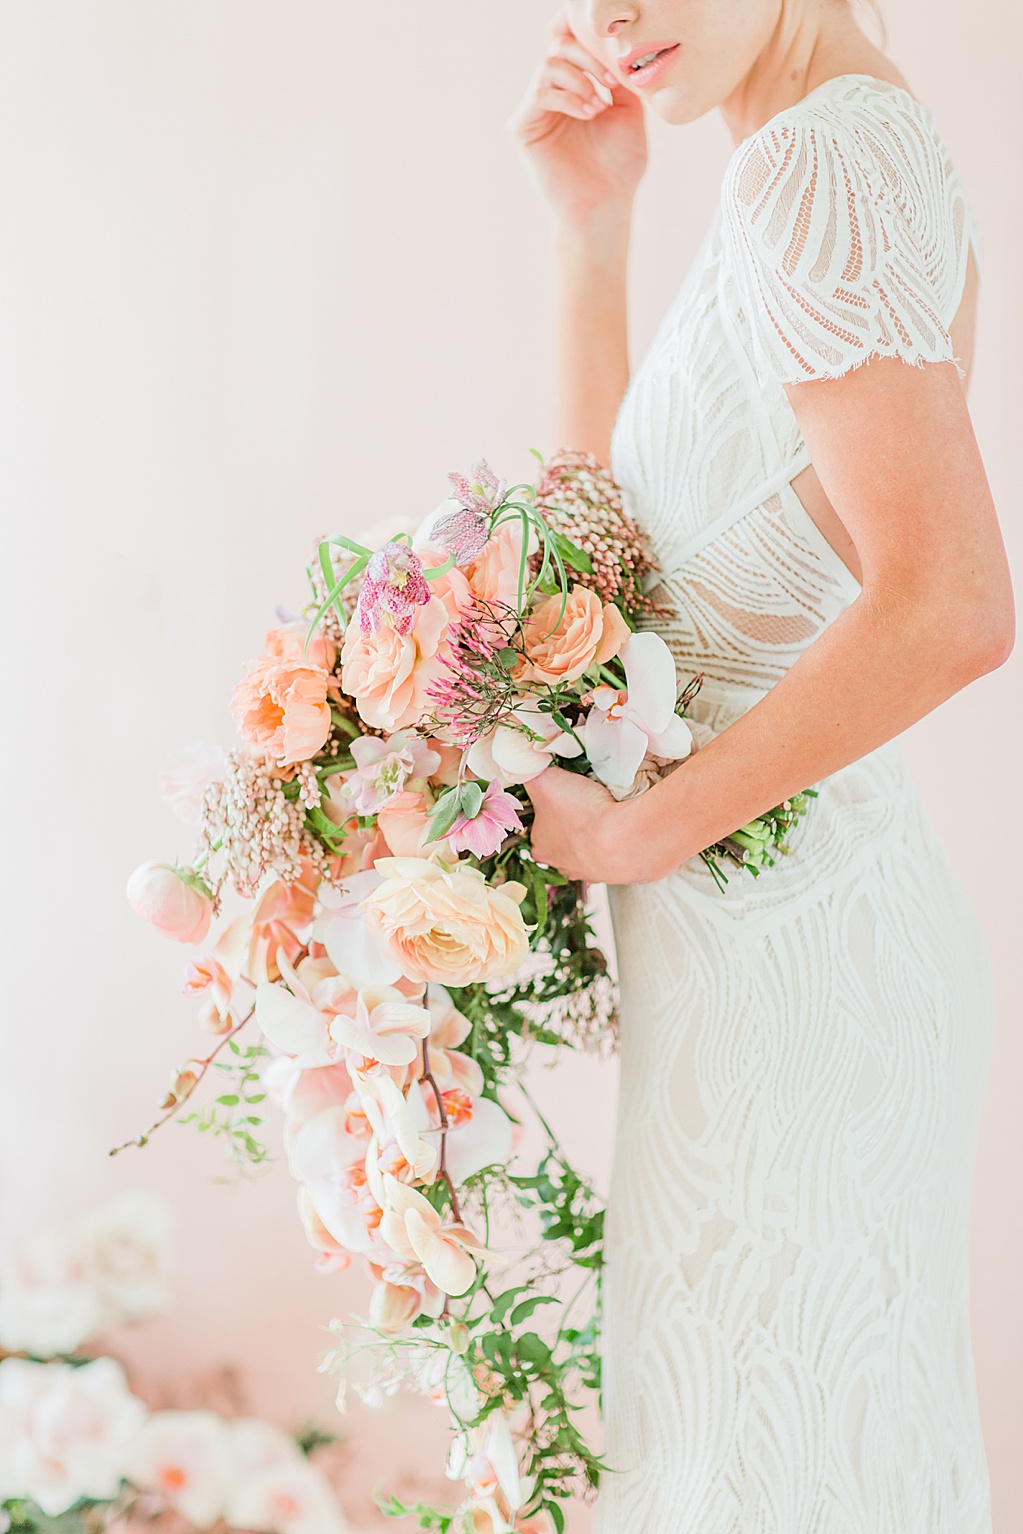 Blush mauve peach and coral wedding inspiration at Prospect House in Dripping Springs Texas wedding venue by Allison Jeffers Photography 0023